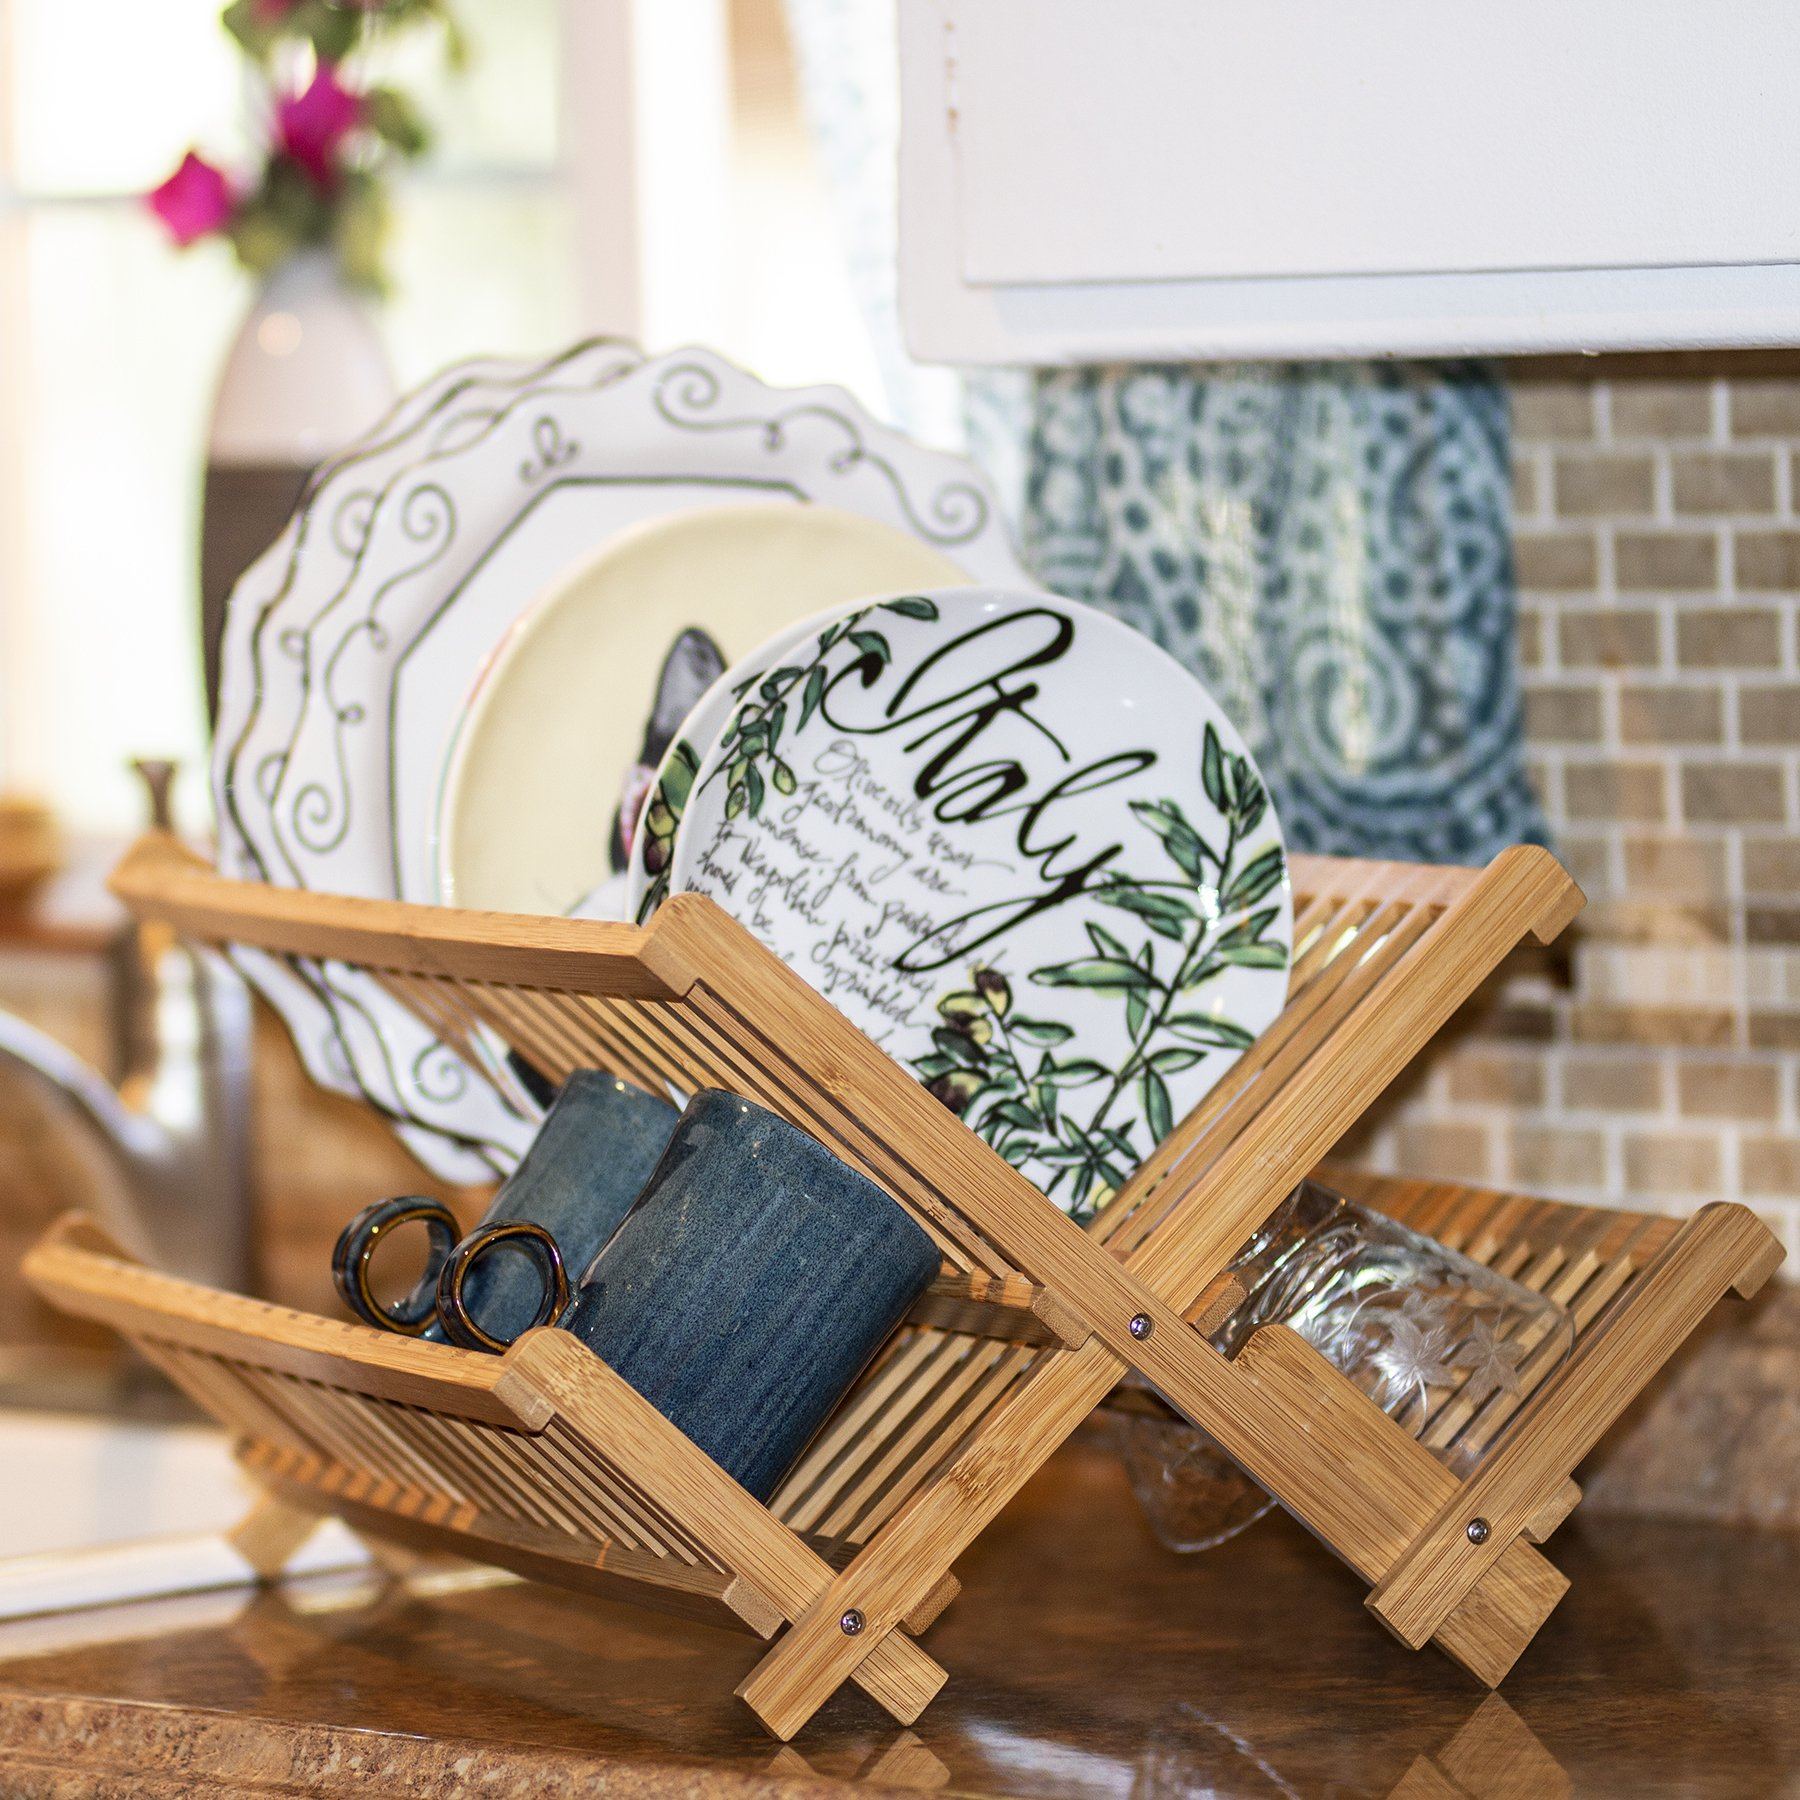 Helen's Asian Kitchen Bamboo Foldable Compact Dish Drying Rack